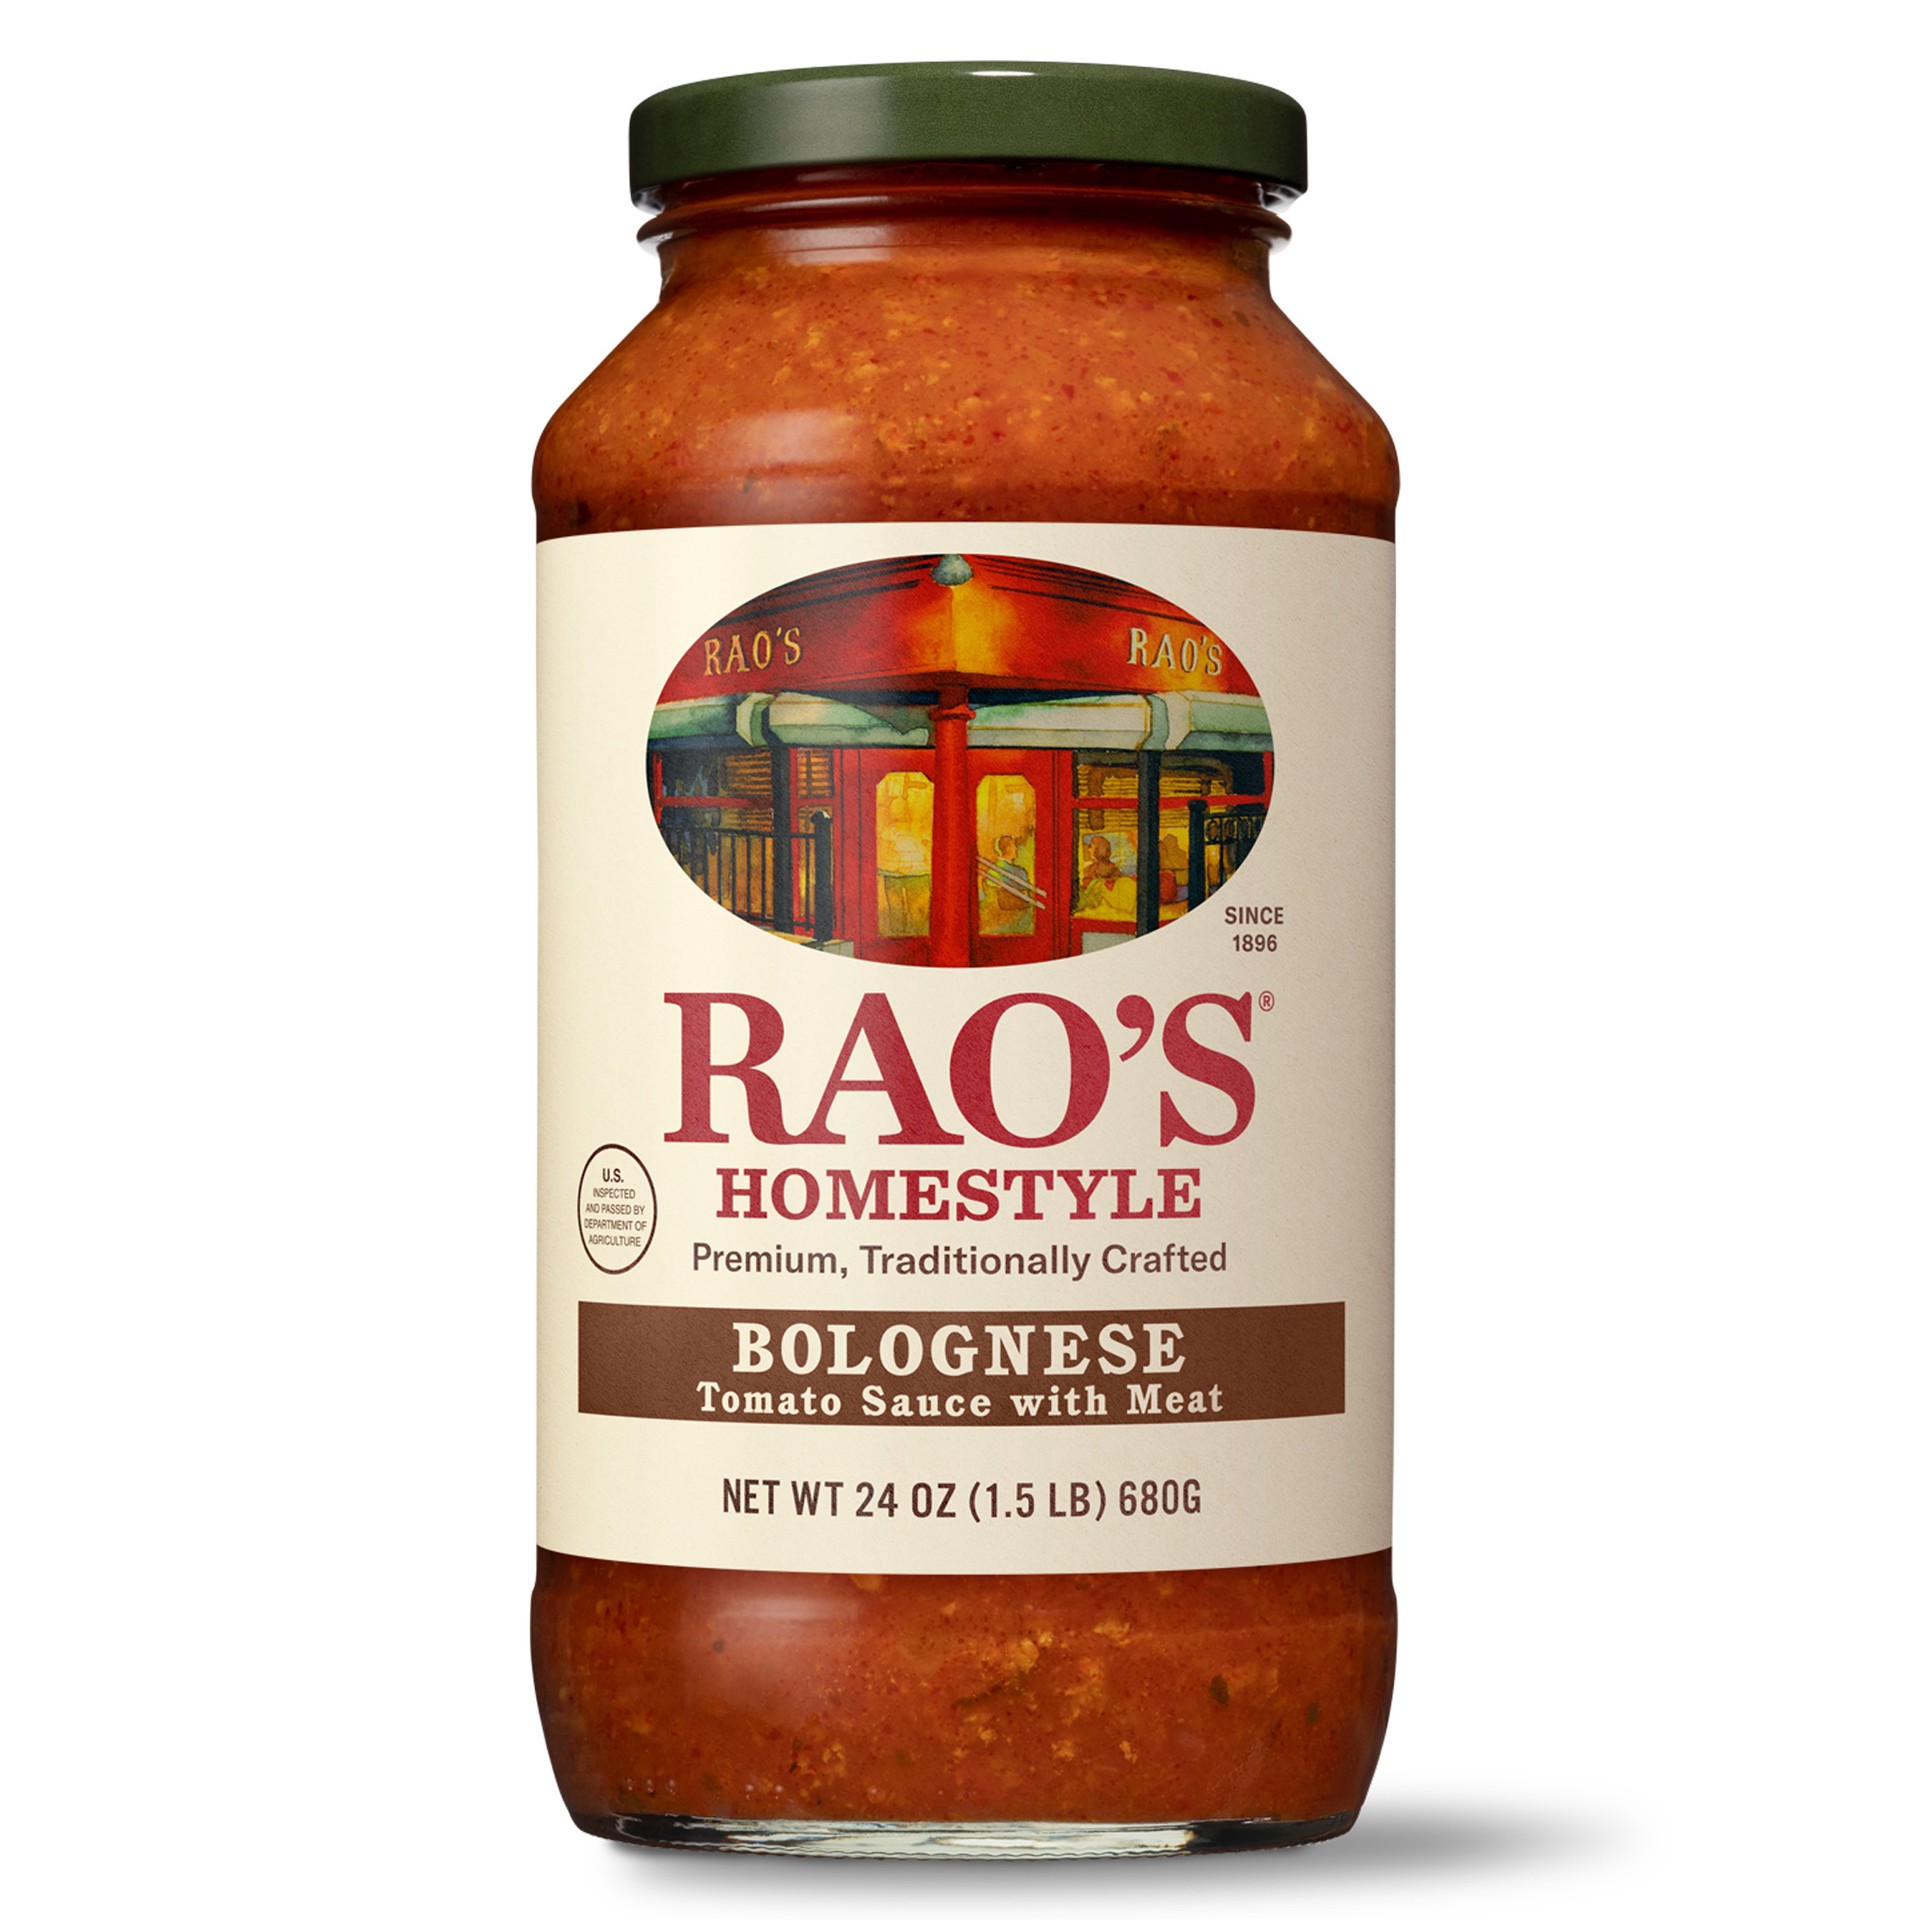 slide 1 of 8, Rao's Homemade Rao's Homestyle Bolognese Sauce | 24 oz | Classic Tomato Sauce | Pasta Sauce | Carb Conscious | Traditionally Crafted, Premium Quality | With Italian Tomatoes, Beef, Pork & Pancetta, 24 oz